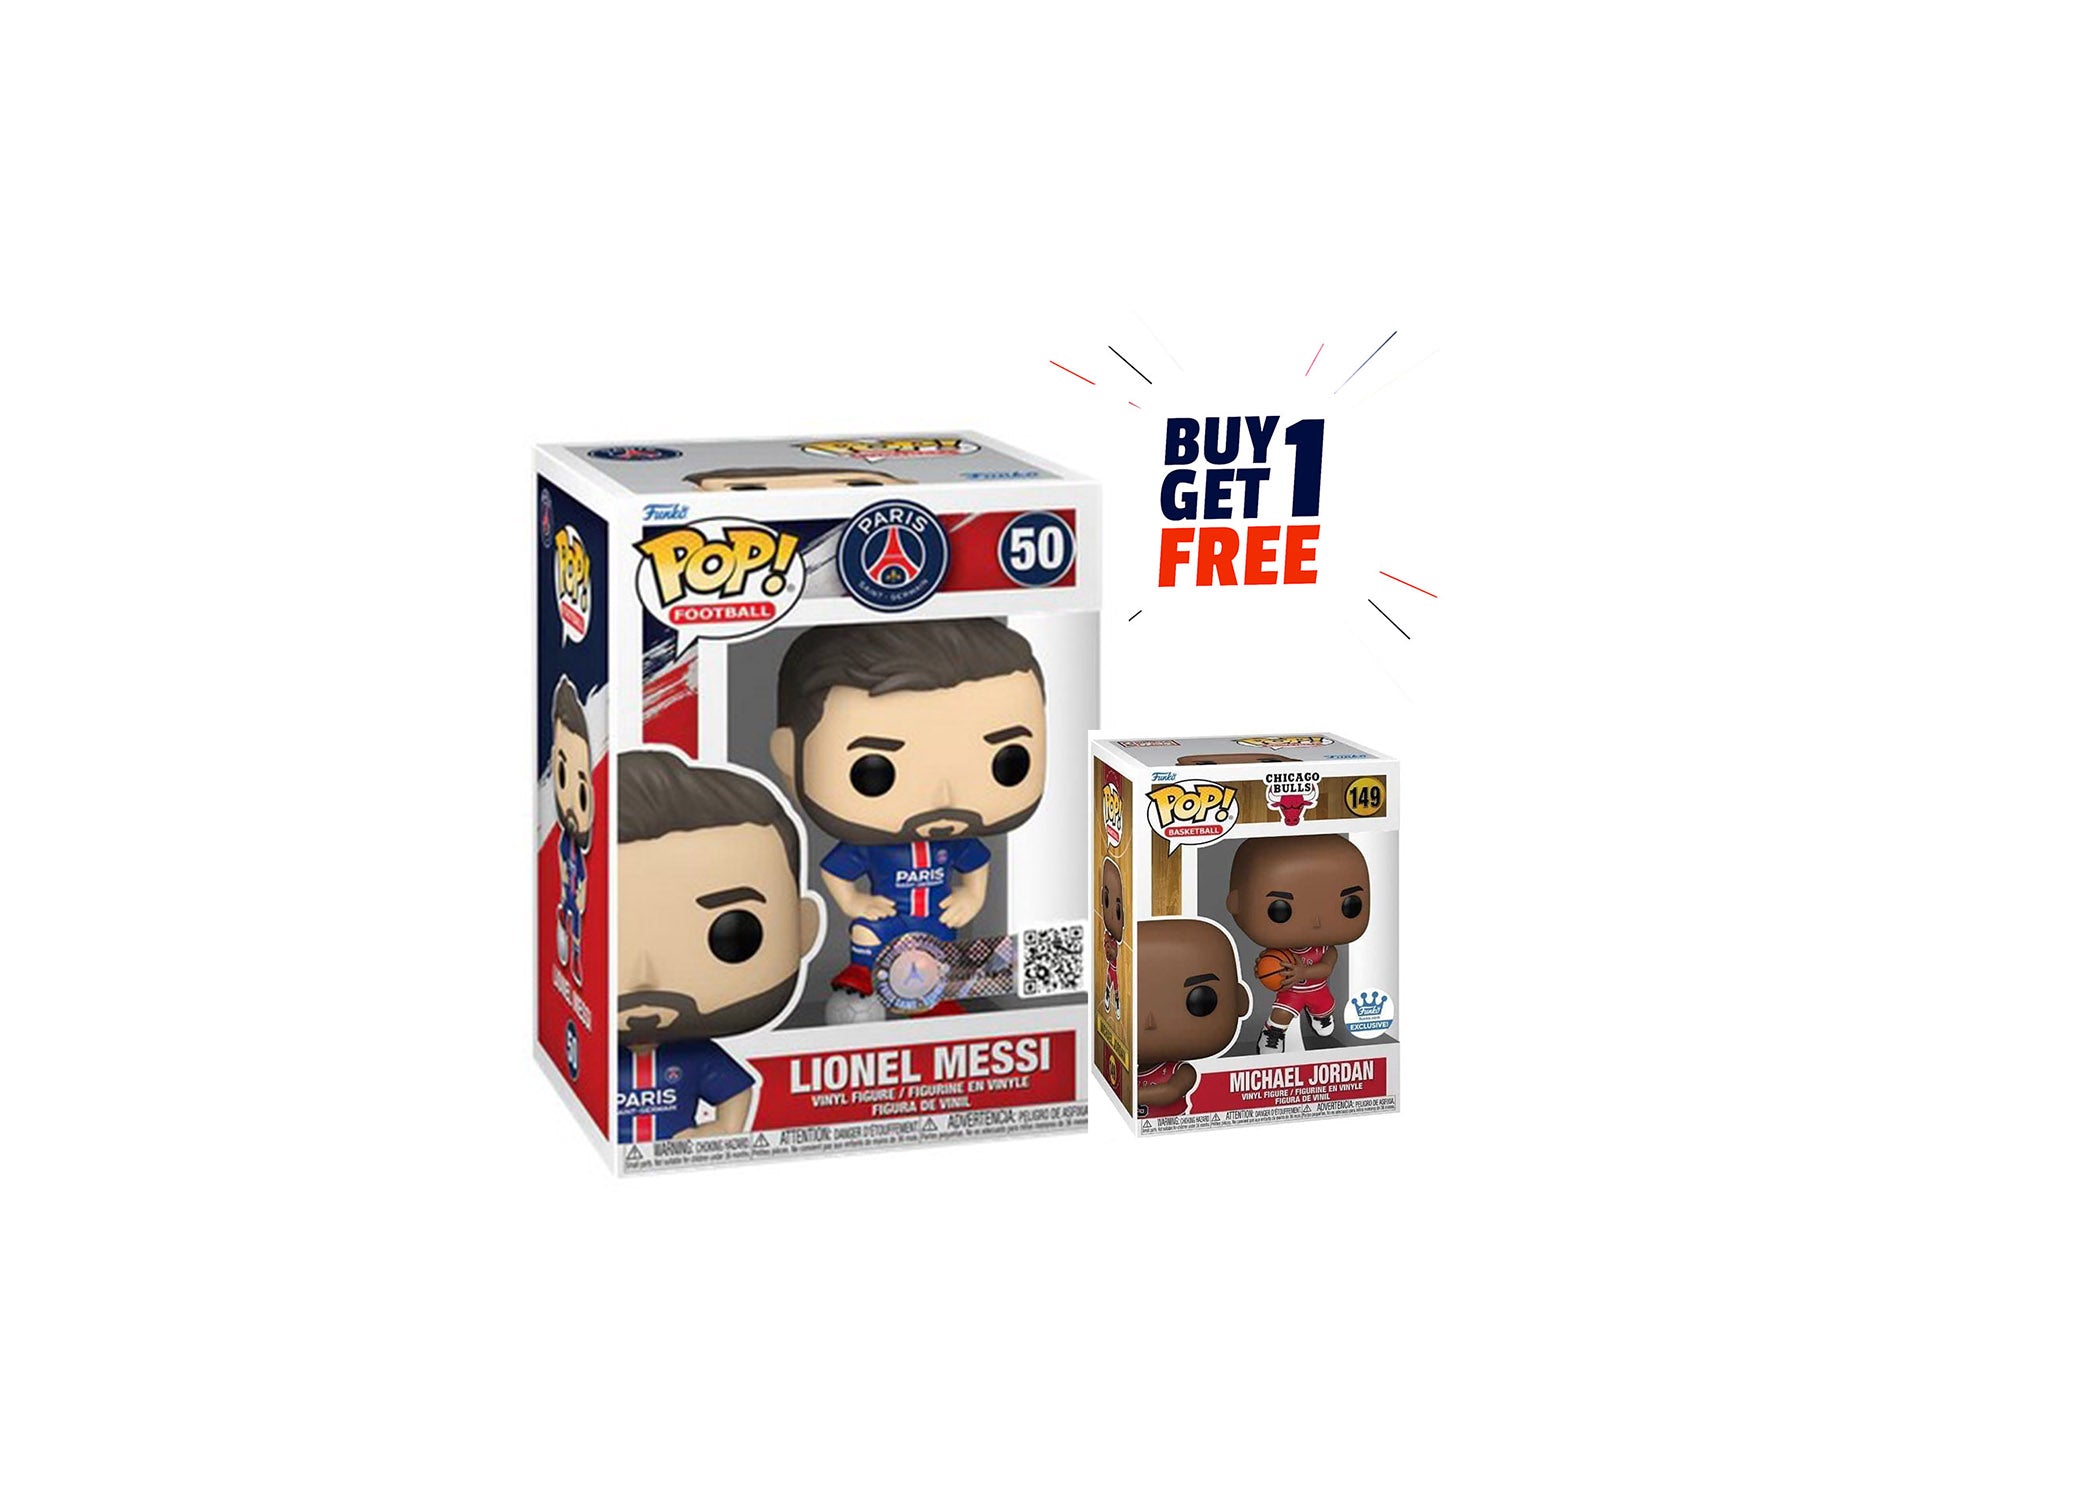 FUNKO POP! FOOTBALL: PSG - Lionel Messi – Toy Place